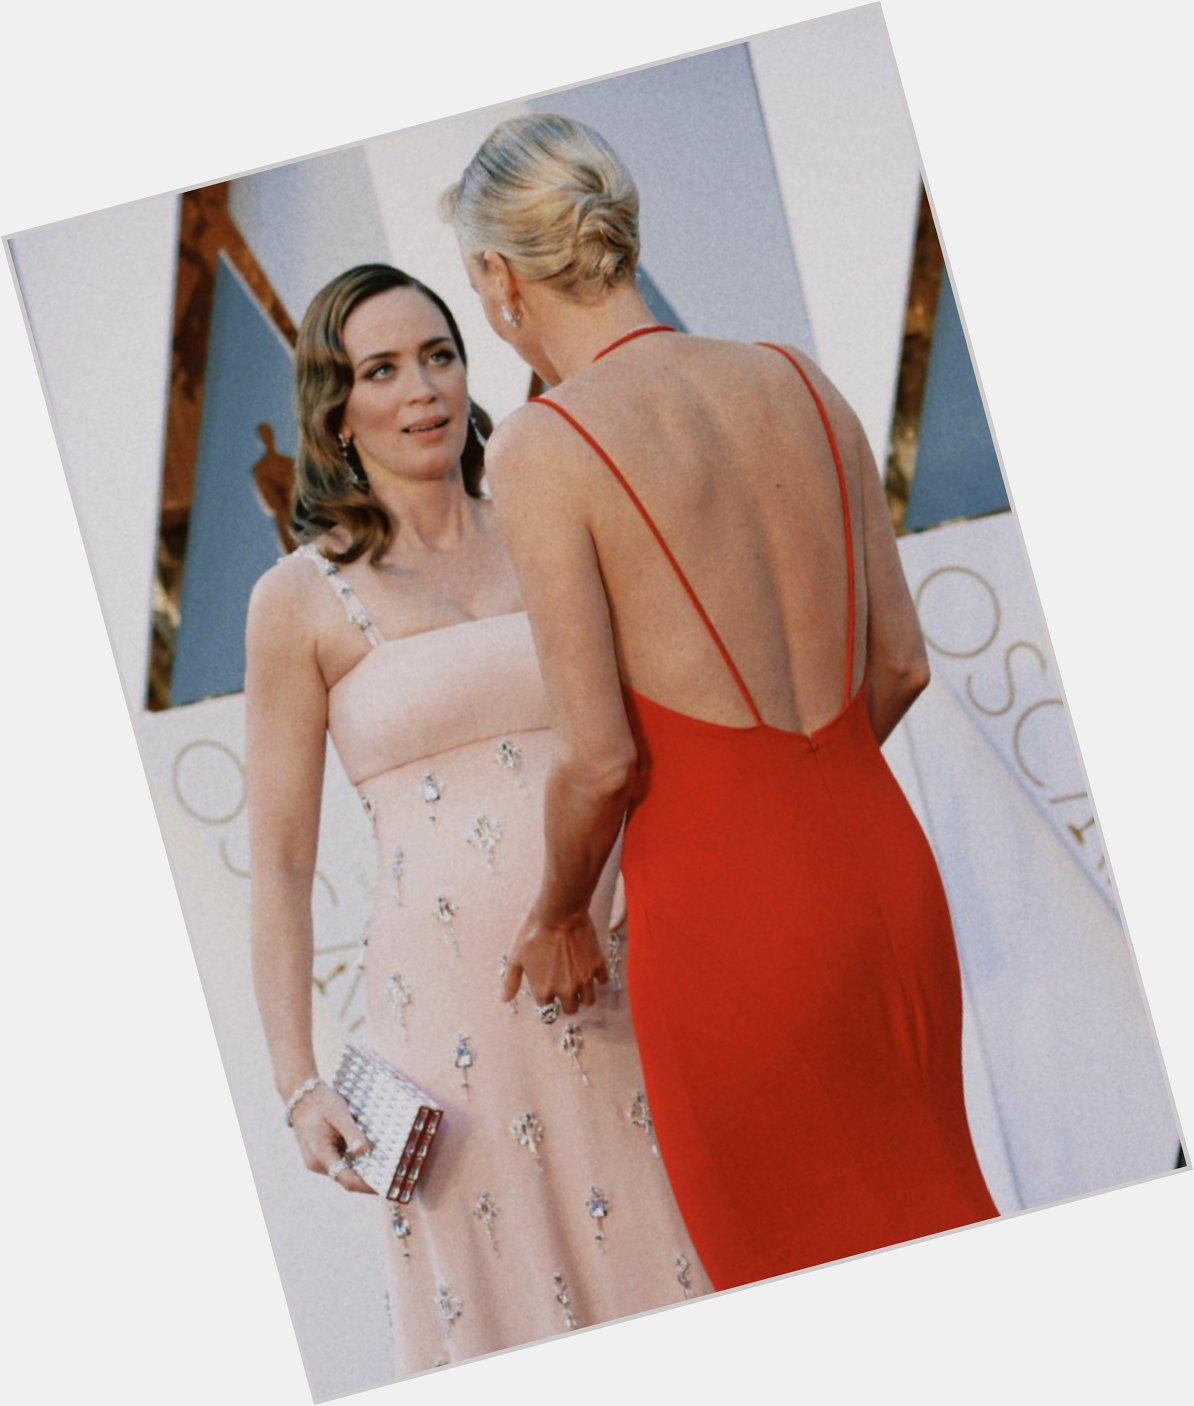 Today is the day of one of charlize\s soul sisters! happy birthday to emily blunt <3 